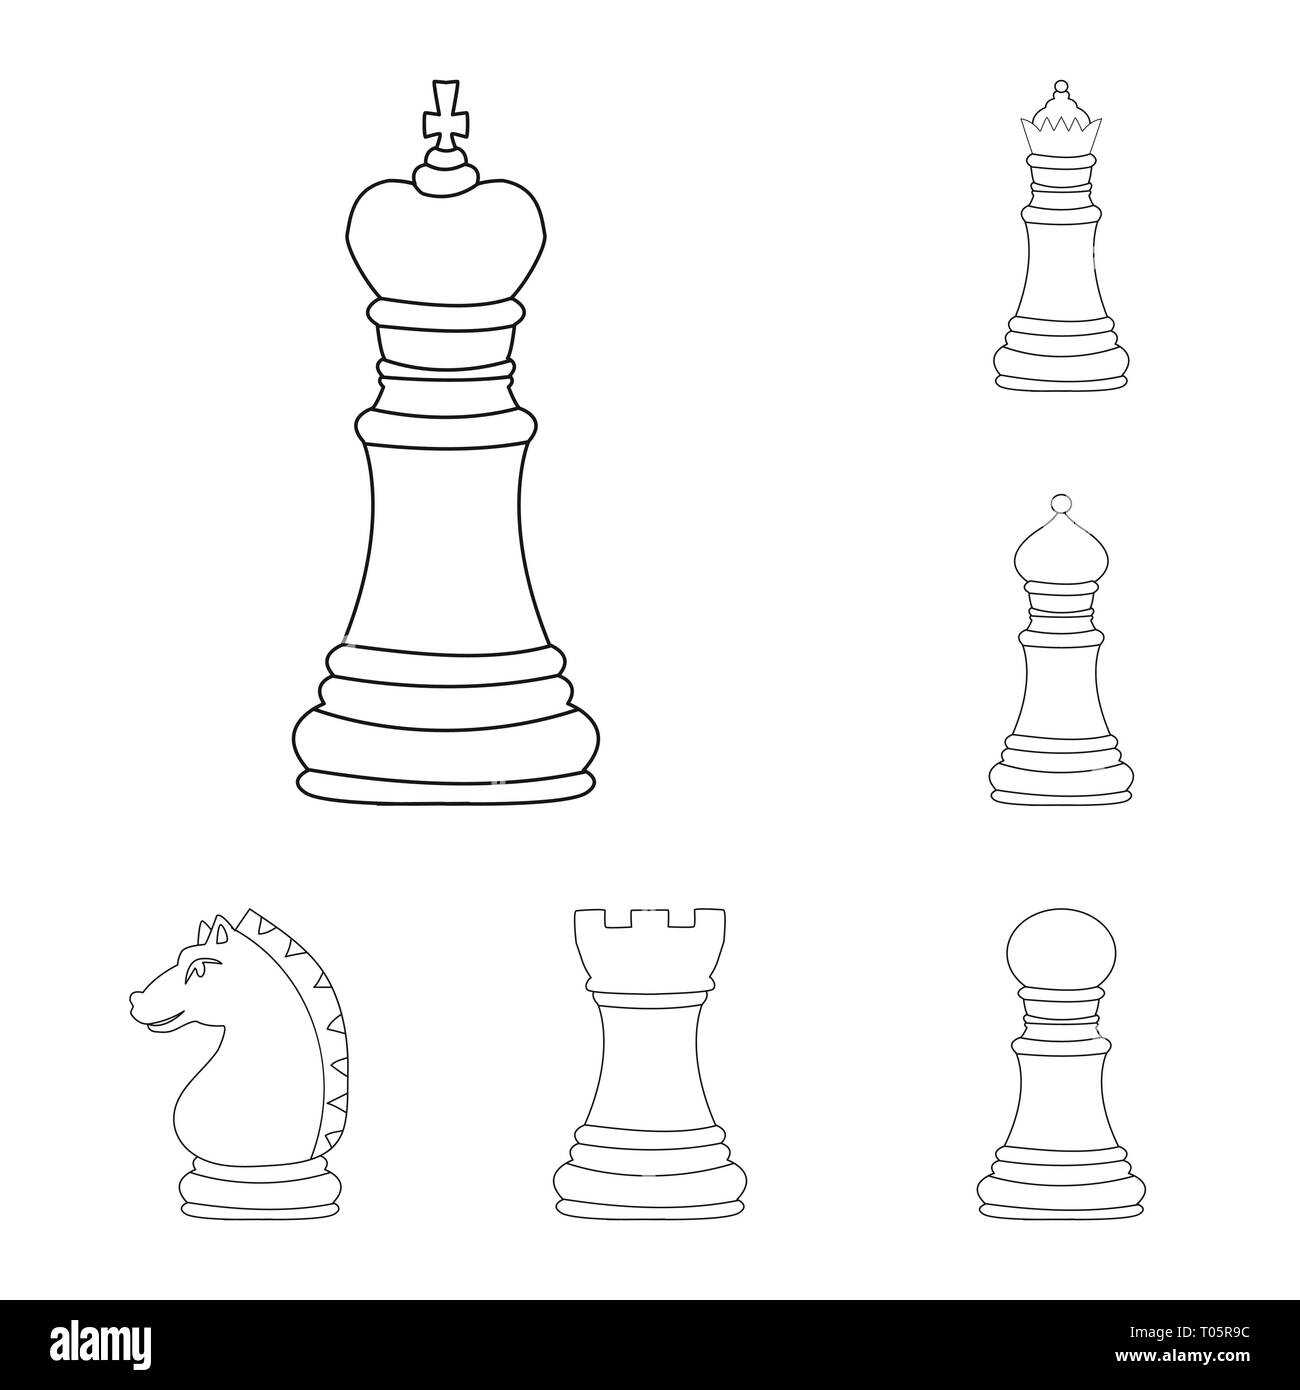 king,queen,bishop,knight,rook,pawn,board,strategic,horse,black,leadership,check,head,network,counter,leader,business,figure,change,manager,sport,tournament,vision,success,challenge,sculpture,goal,achieve,piece,strategy,tactical,play,checkmate,thin,club,target,chess,game,set,vector,icon,illustration,isolated,collection,design,element,graphic,sign,outline,line Vector Vectors , Stock Vector